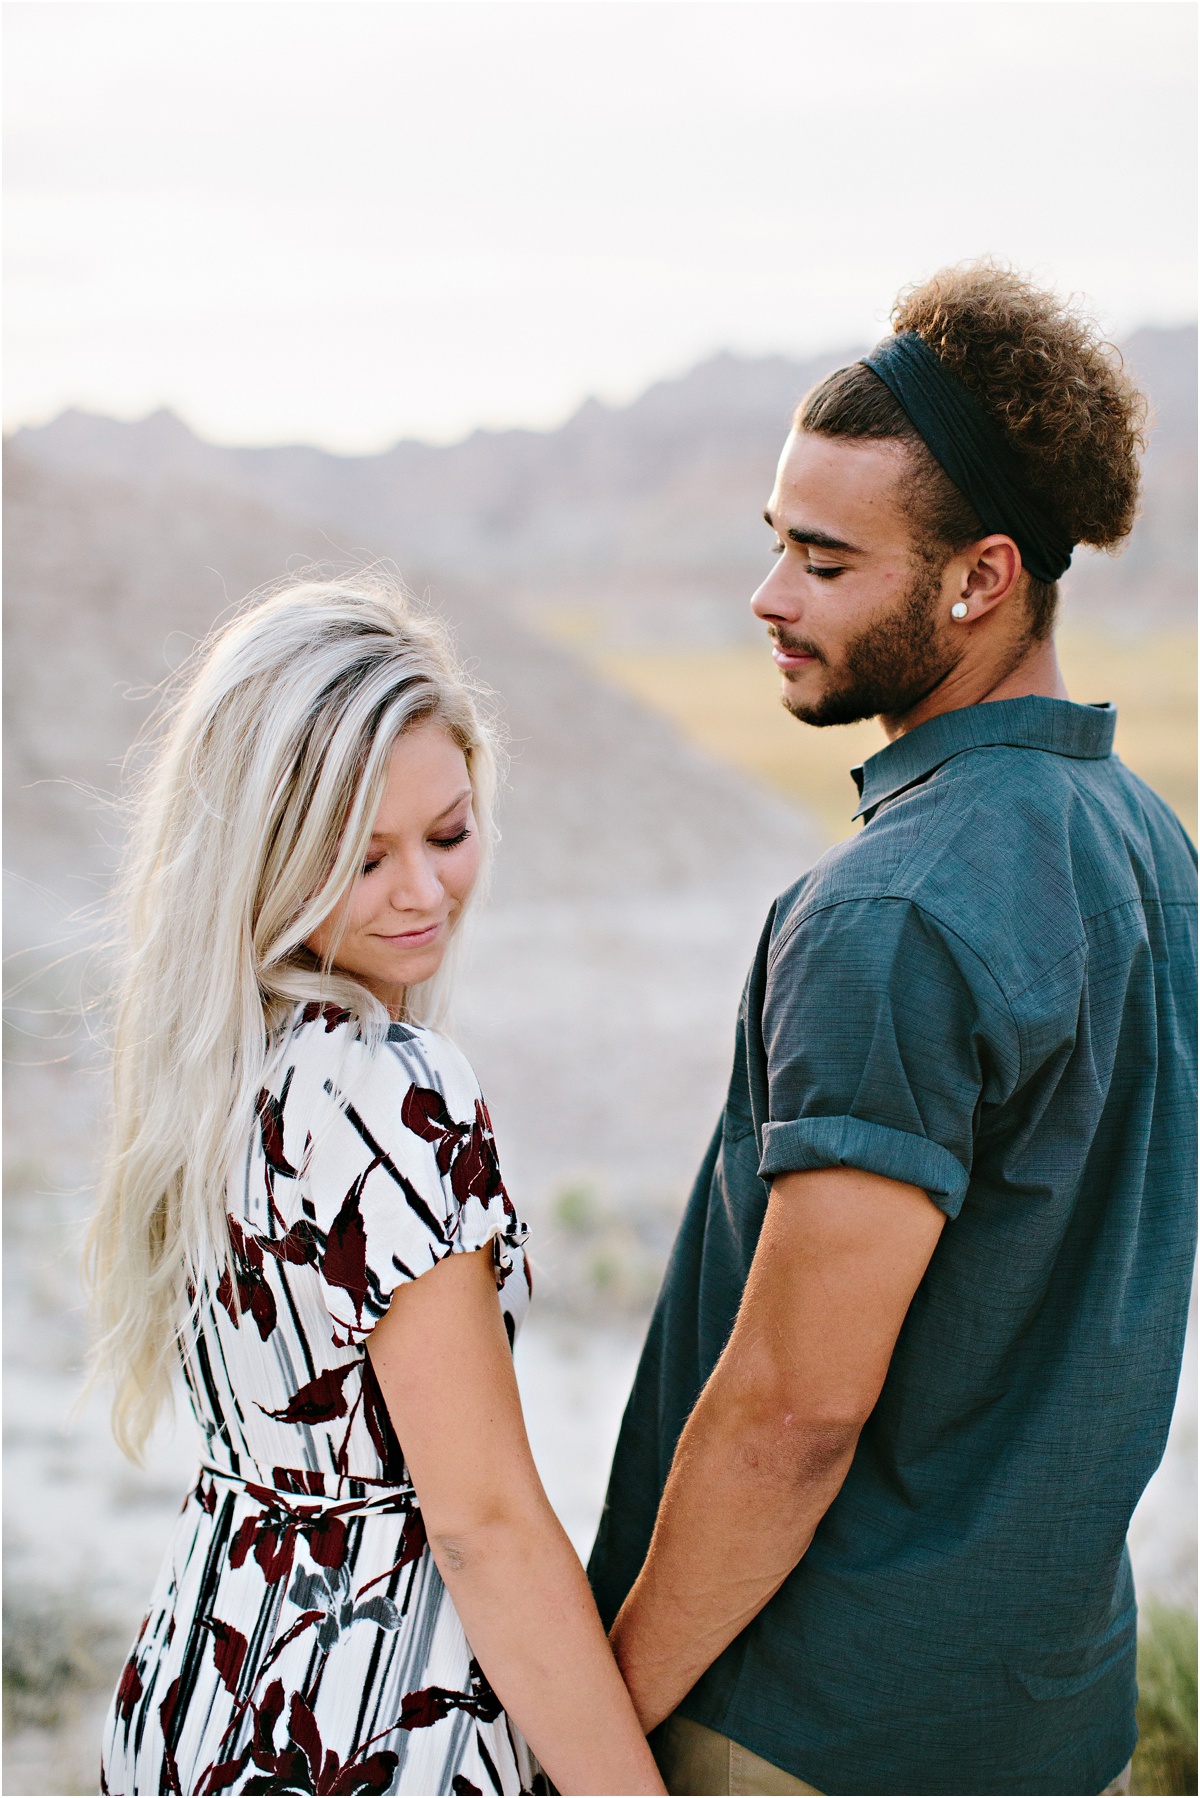 Badlands National Park Engagement Session | by Stacee Lianna Photography